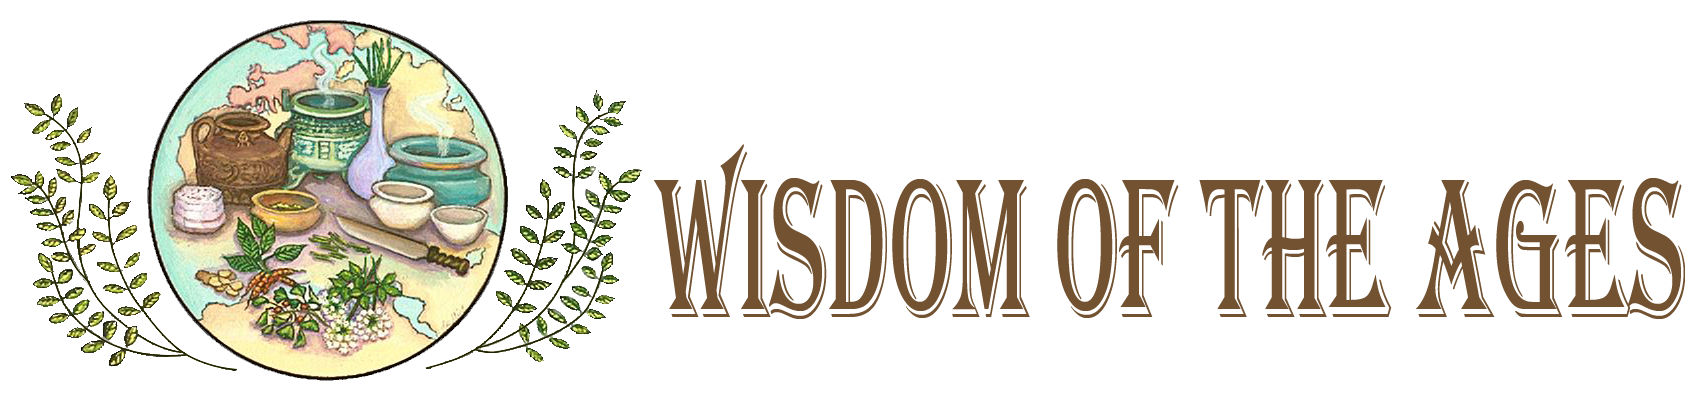 Wisdom of the ages llc